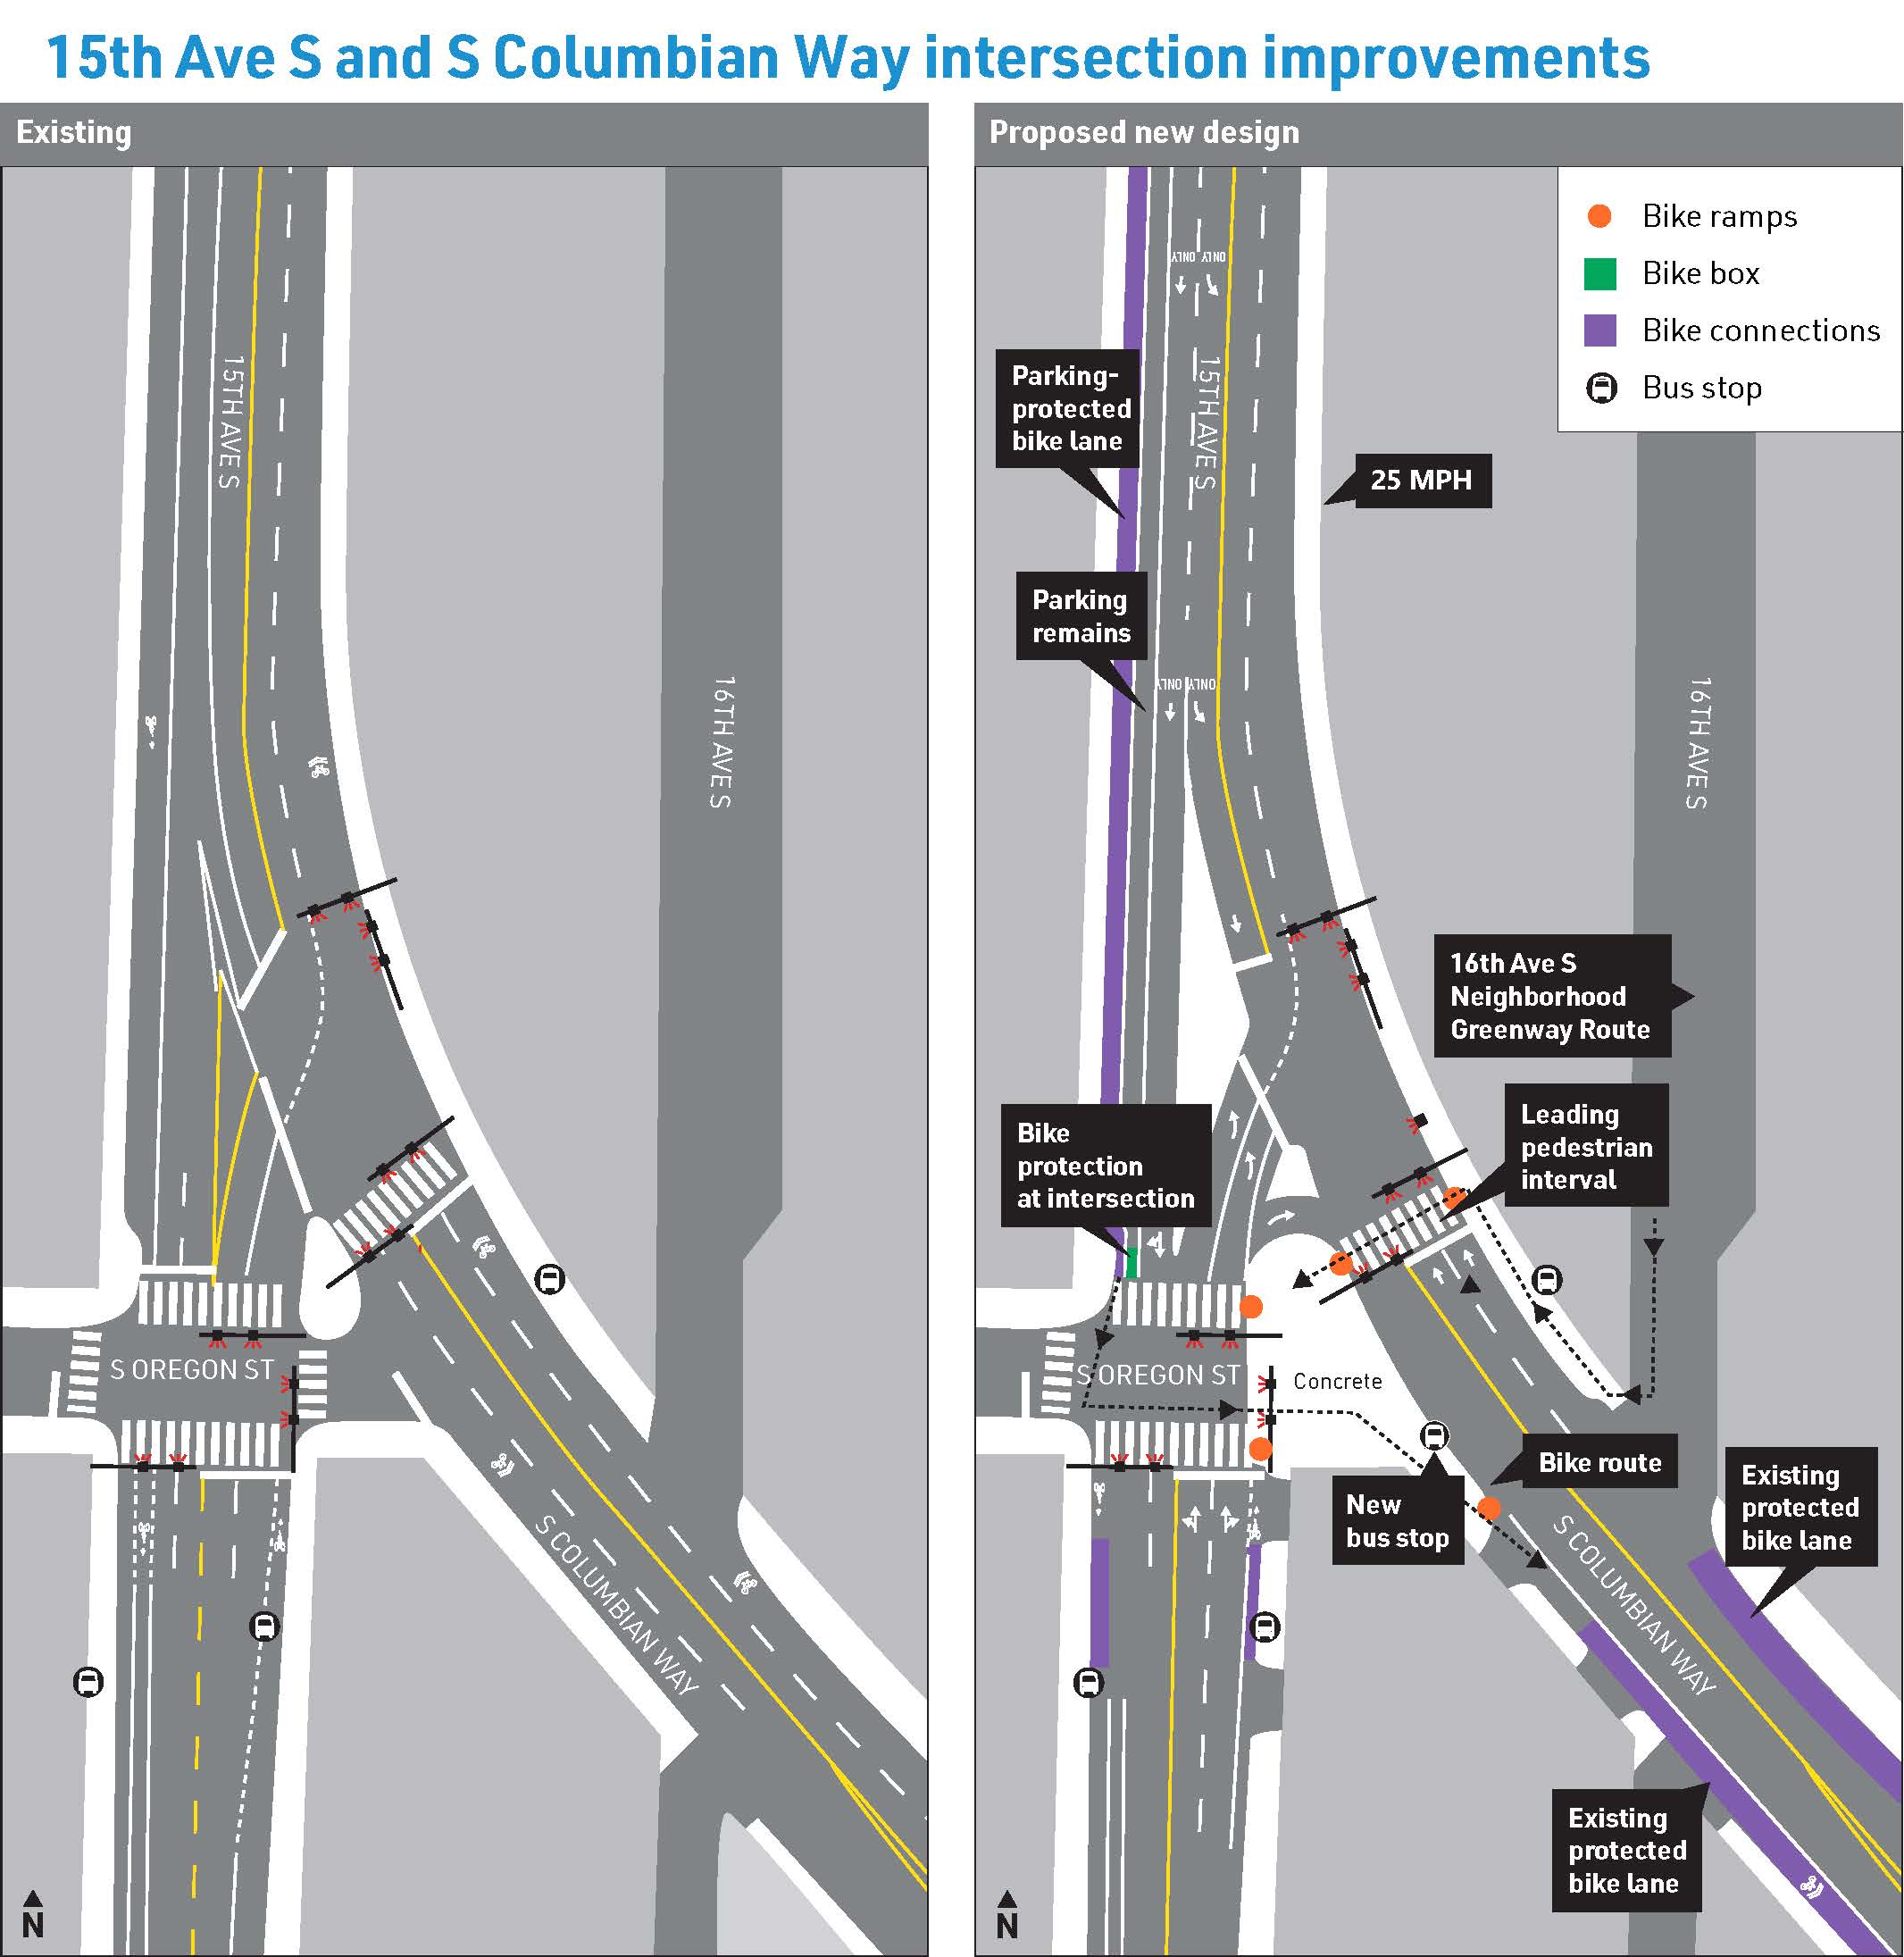 Details of 15th Ave S and S Columbian Way intersection improvements